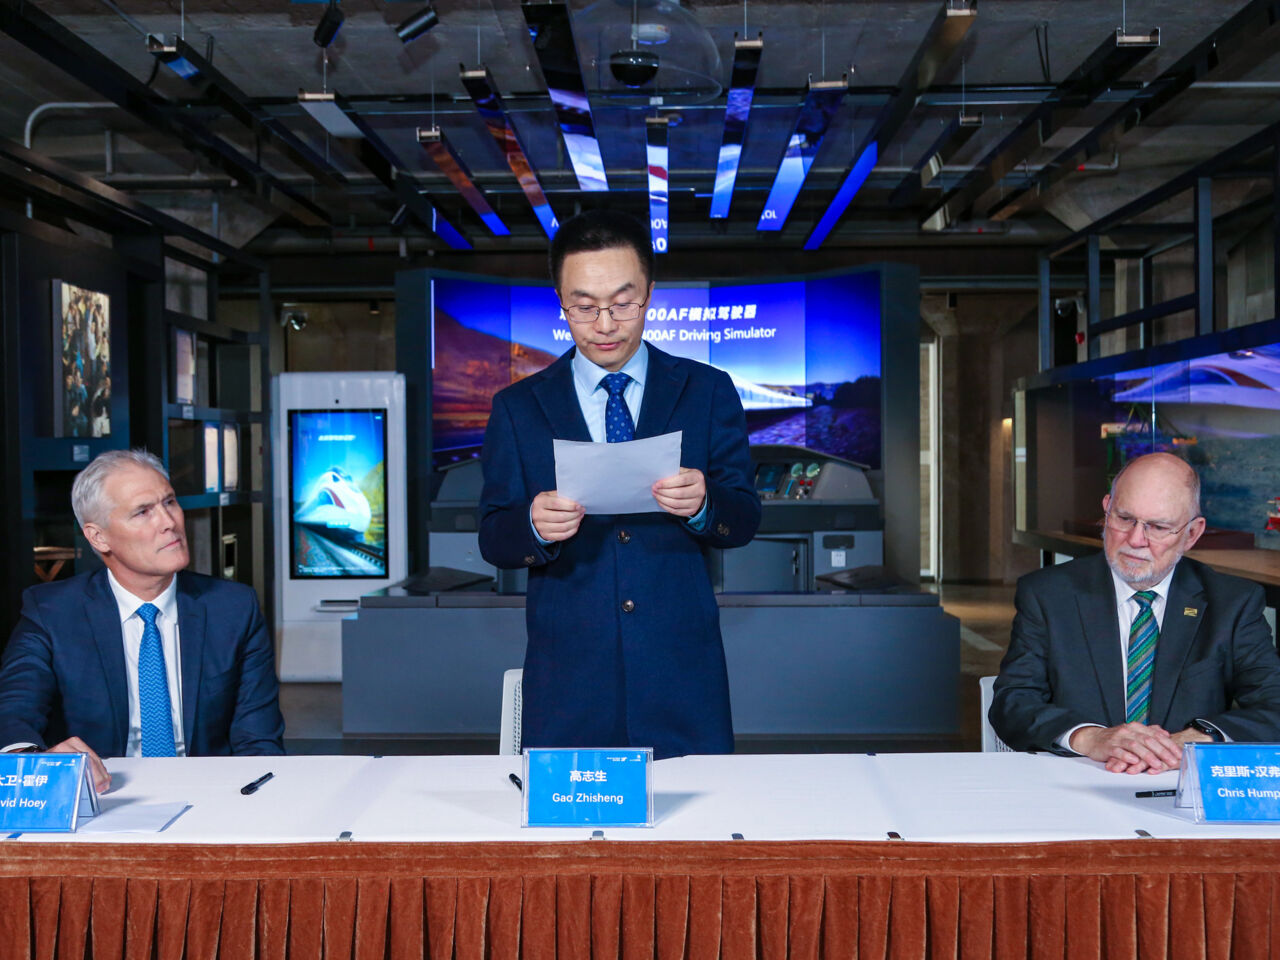 Zhisheng Gao, General Manager of Jiean Hi-tech gives a speech during a signing ceremony atthe opening of the WorldSkills Museum in Shanghai, China.